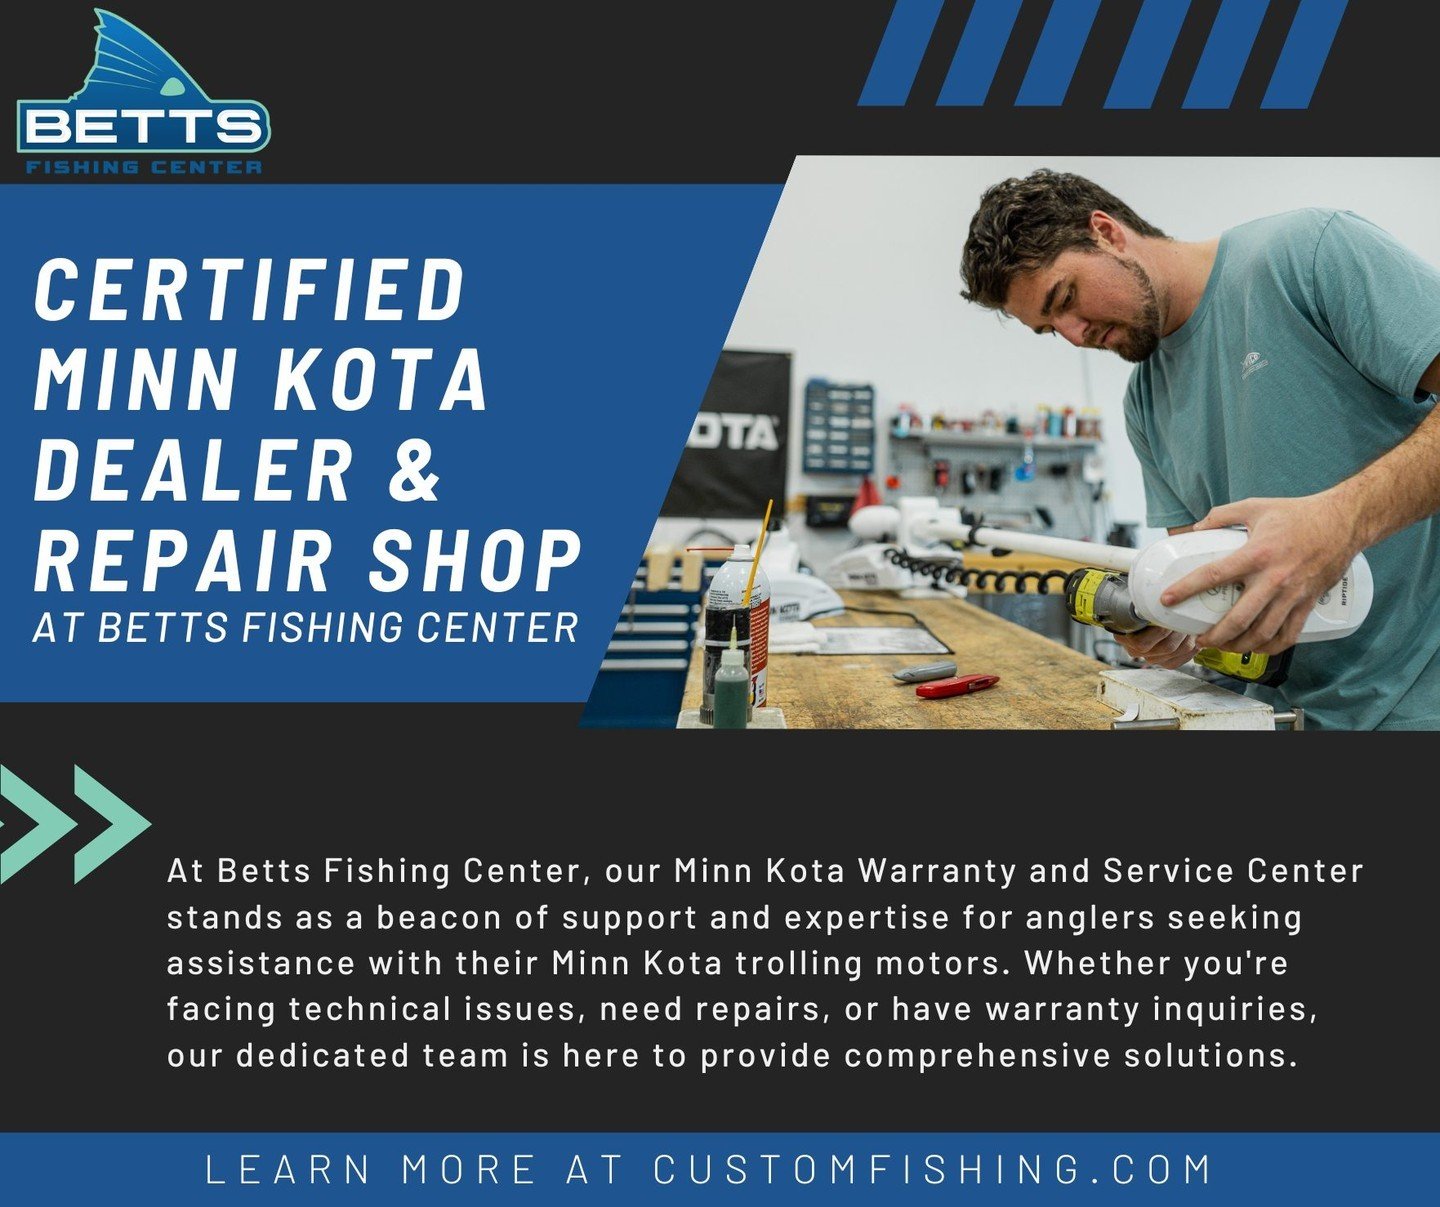 We are a certified Minn Kota Dealer &amp; Repair Shop. This means all of your Minn Kota purchases from us come with a standard 2 to 3-year warranty depending on the product!

#saltwaterfishing #fishing #fishinglife #fish #catchandrelease #saltlife #f